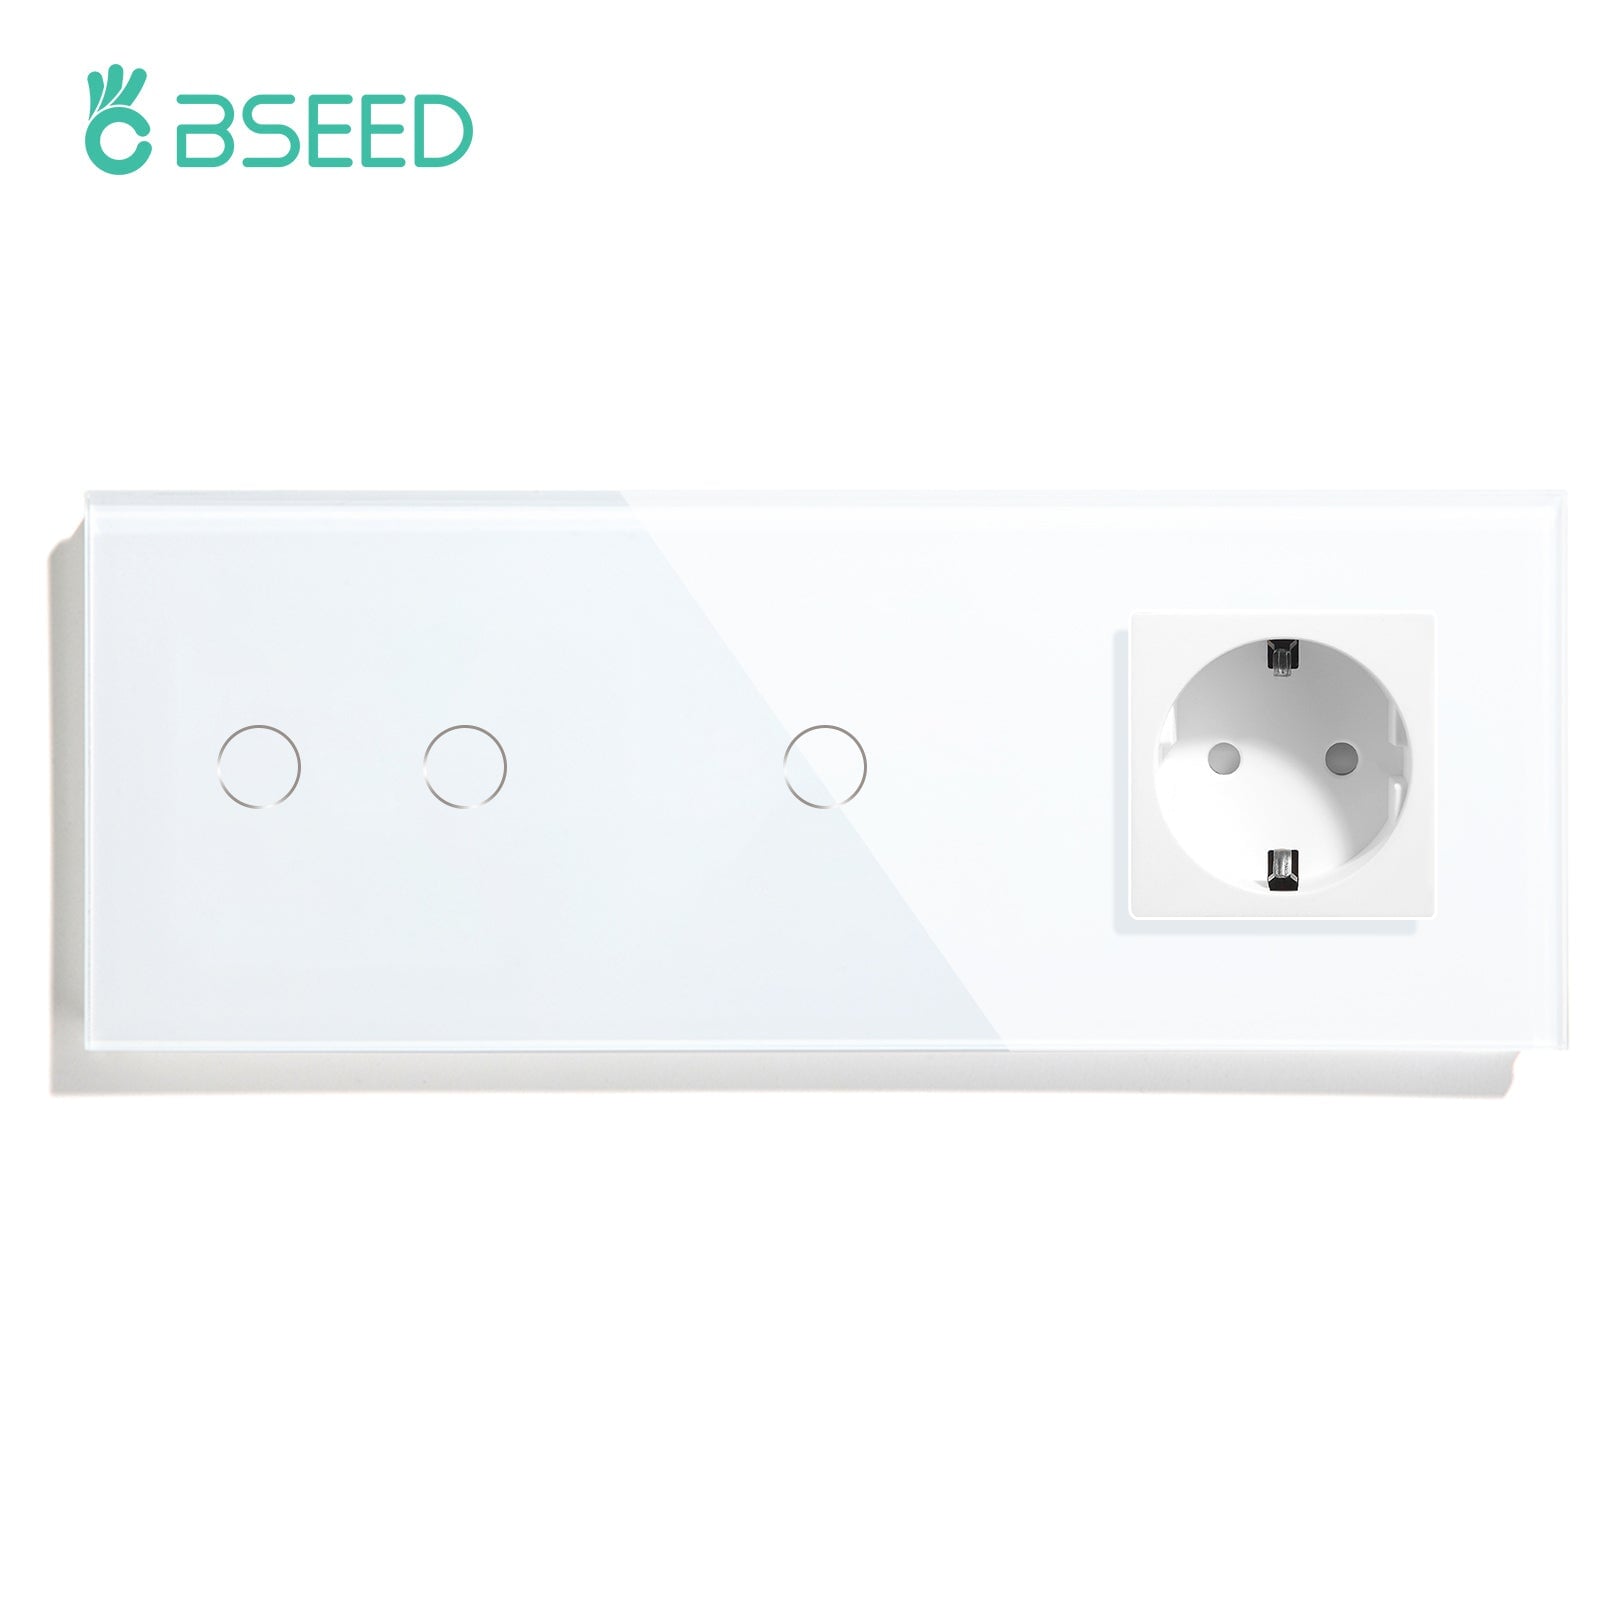 BSEED Double Touch 1/2/3 Gnag 1/2/3 Way Light Switch With EU Socket Power Outlets & Sockets Bseedswitch White 2gang+1gang 1Way